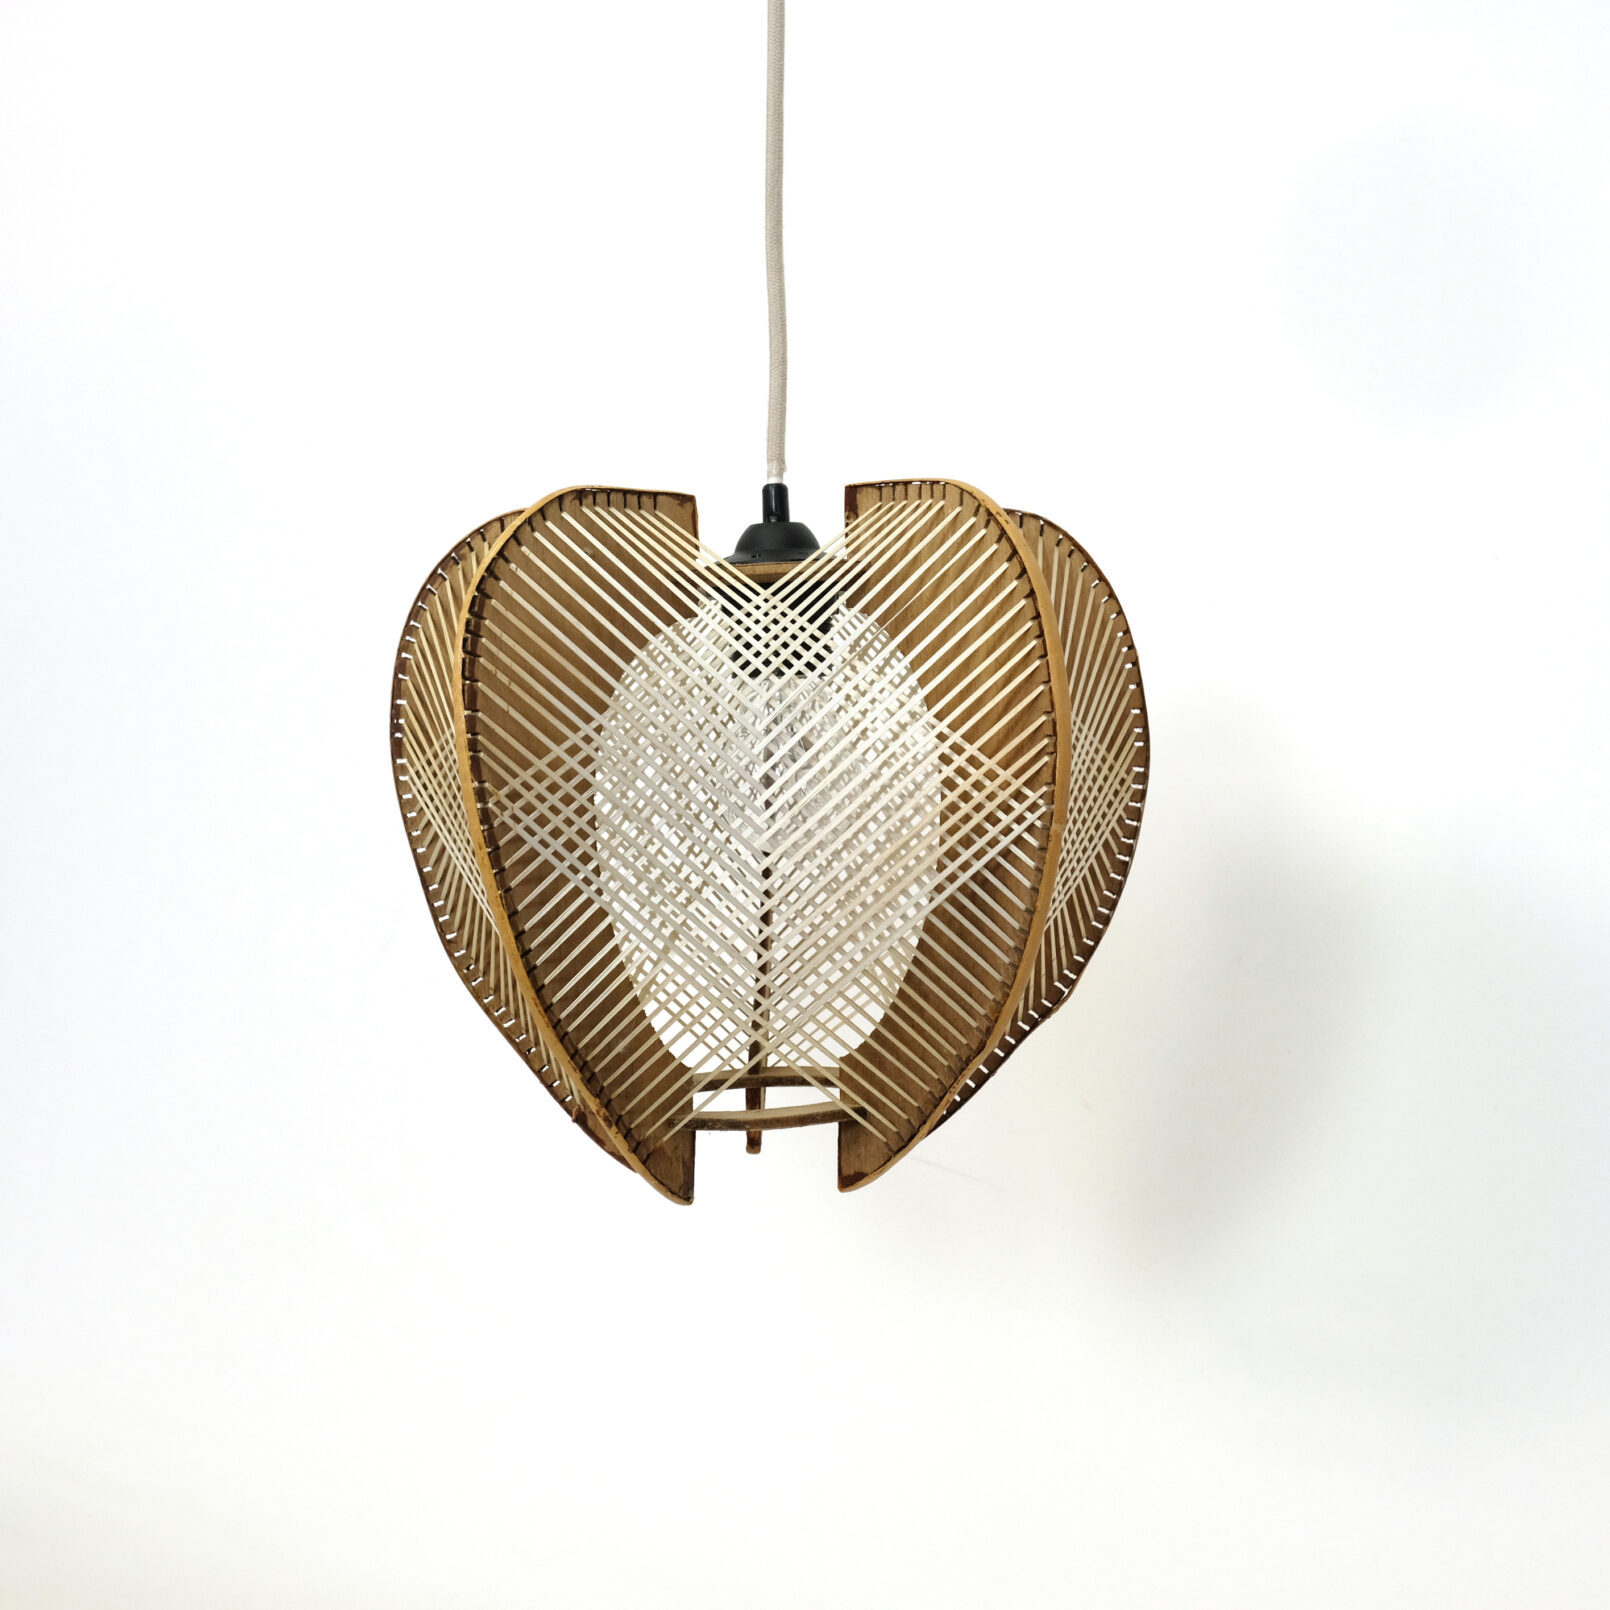 French hanging lamp made of wood and string, 1960s-1970s.